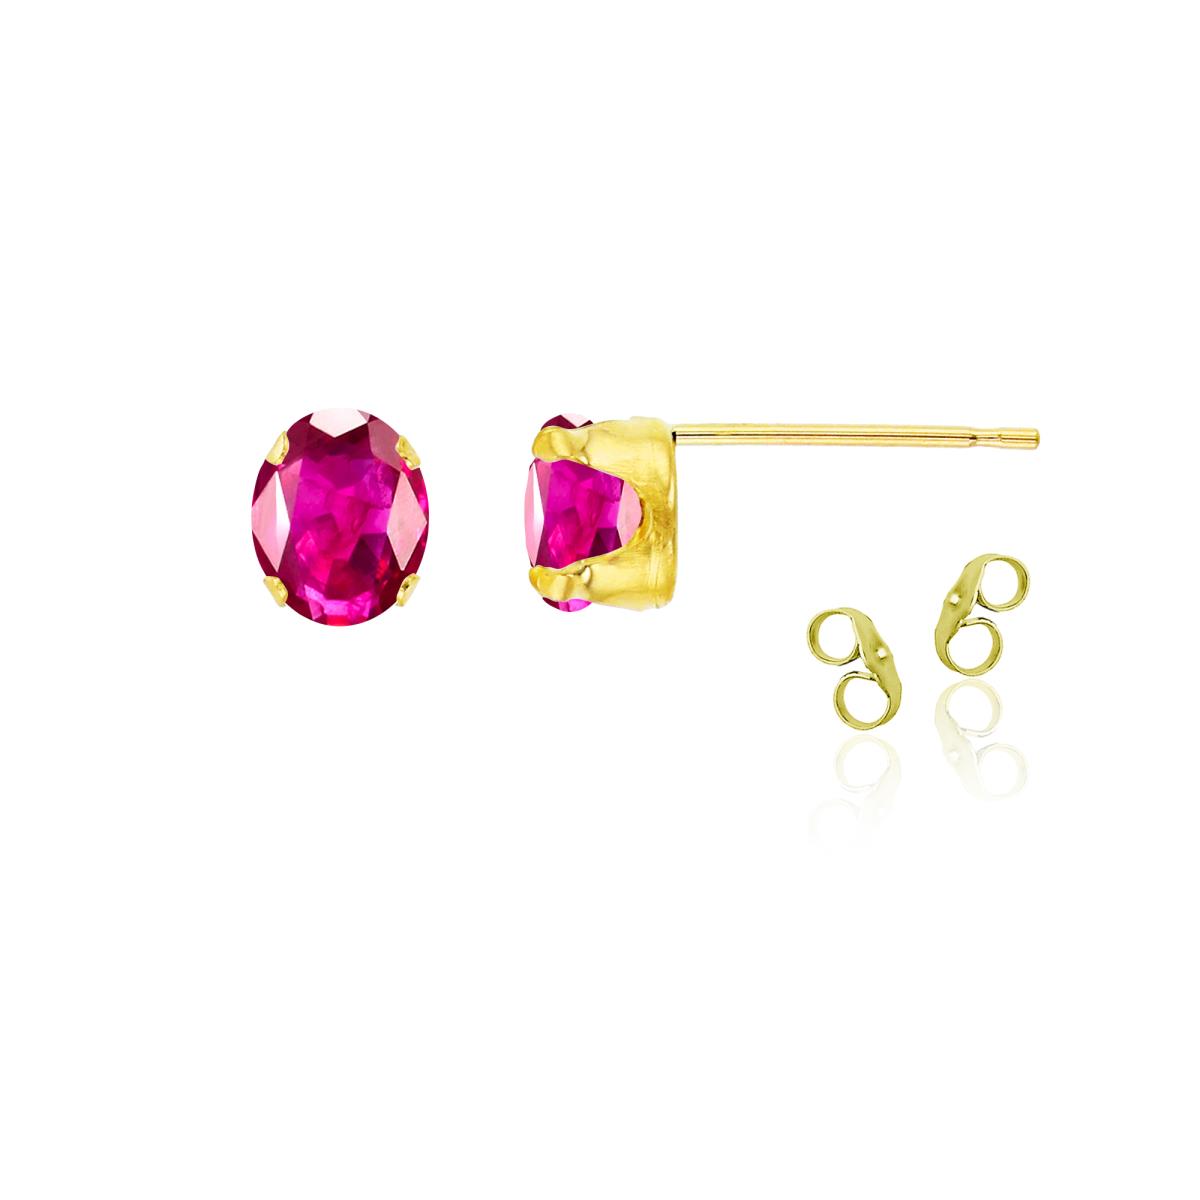 Sterling Silver Yellow 6x4mm Oval Glass Filled Ruby Stud Earring with Clutch